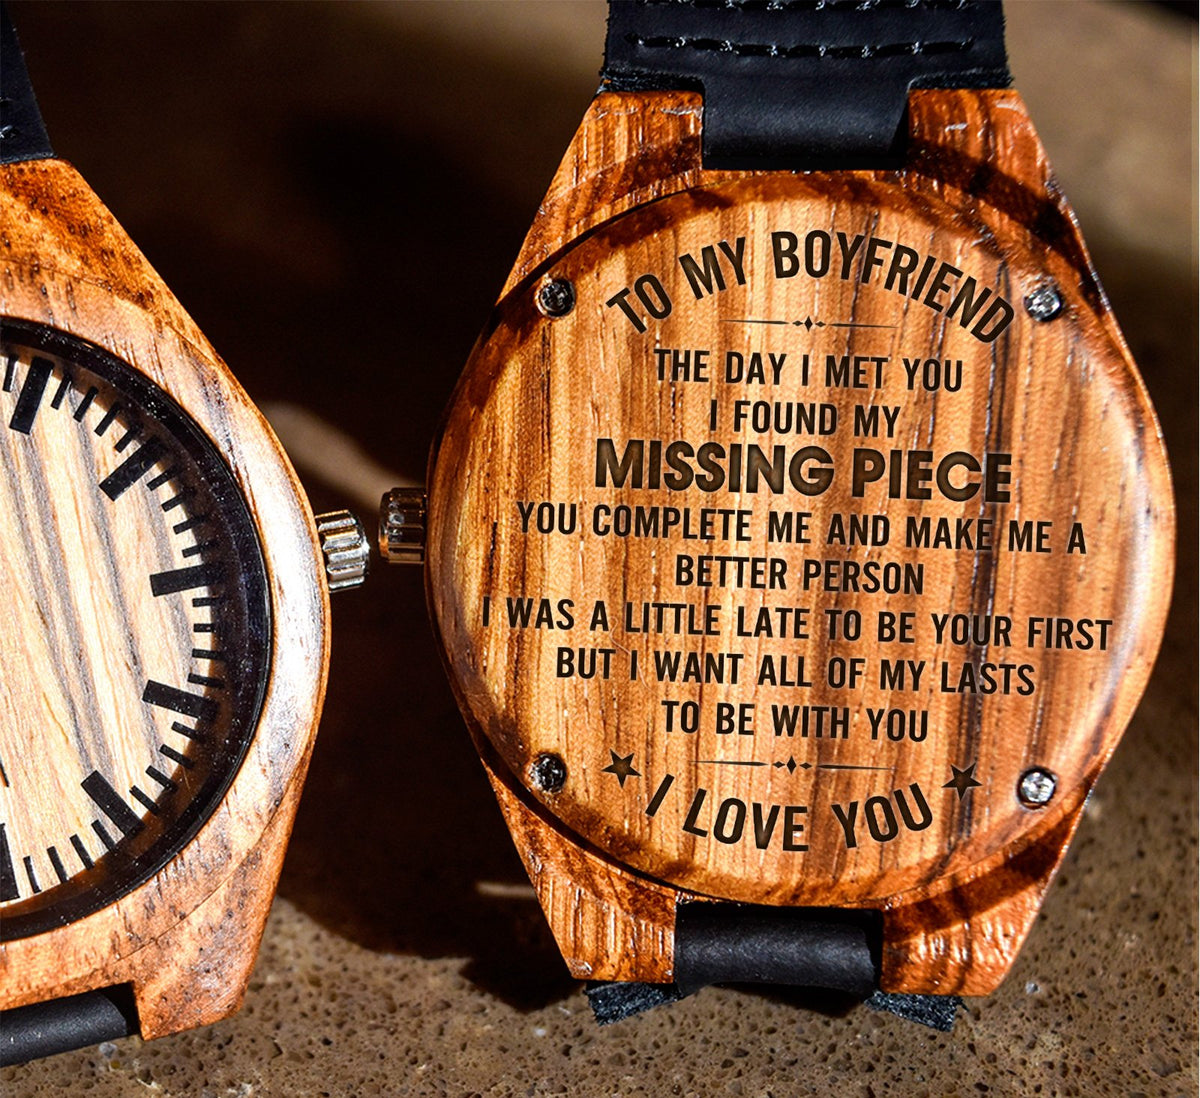 To My Boyfriend - You Complete Me and Make Me A Better Person - Wooden Watch